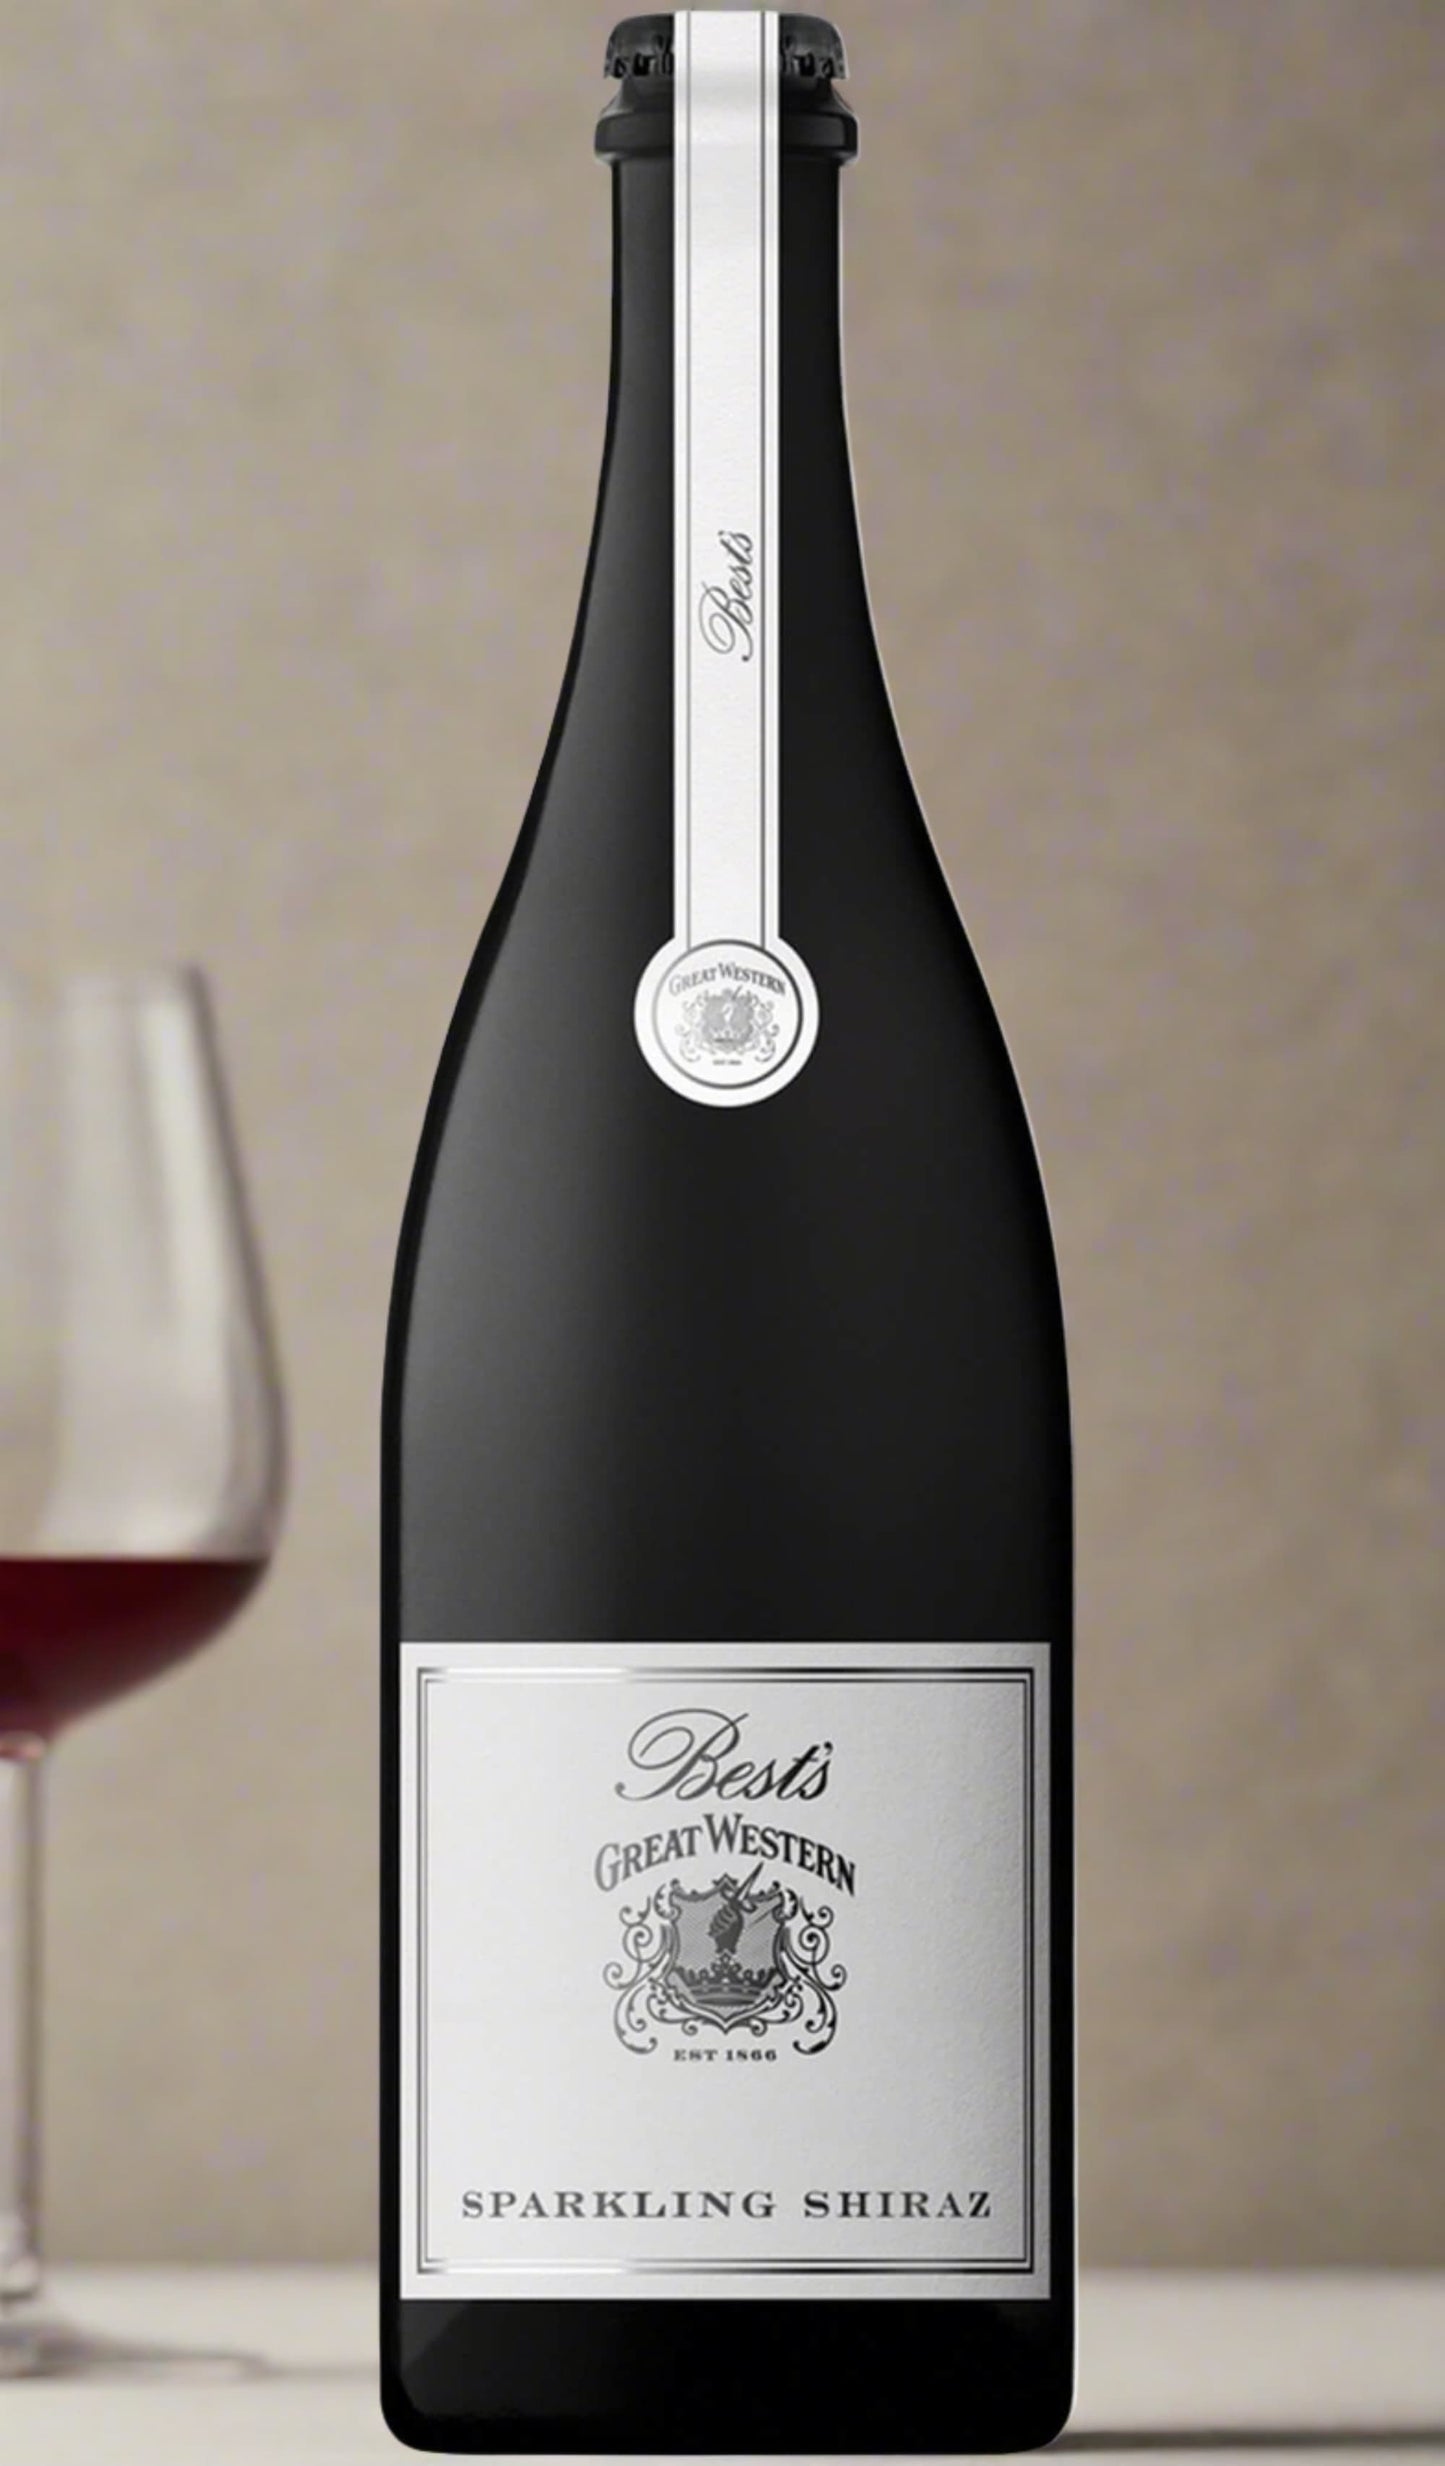 Find out more or buy Best's Wines Great Western Sparkling Shiraz 2020 online at Wine Sellers Direct - Australia’s independent liquor specialists.